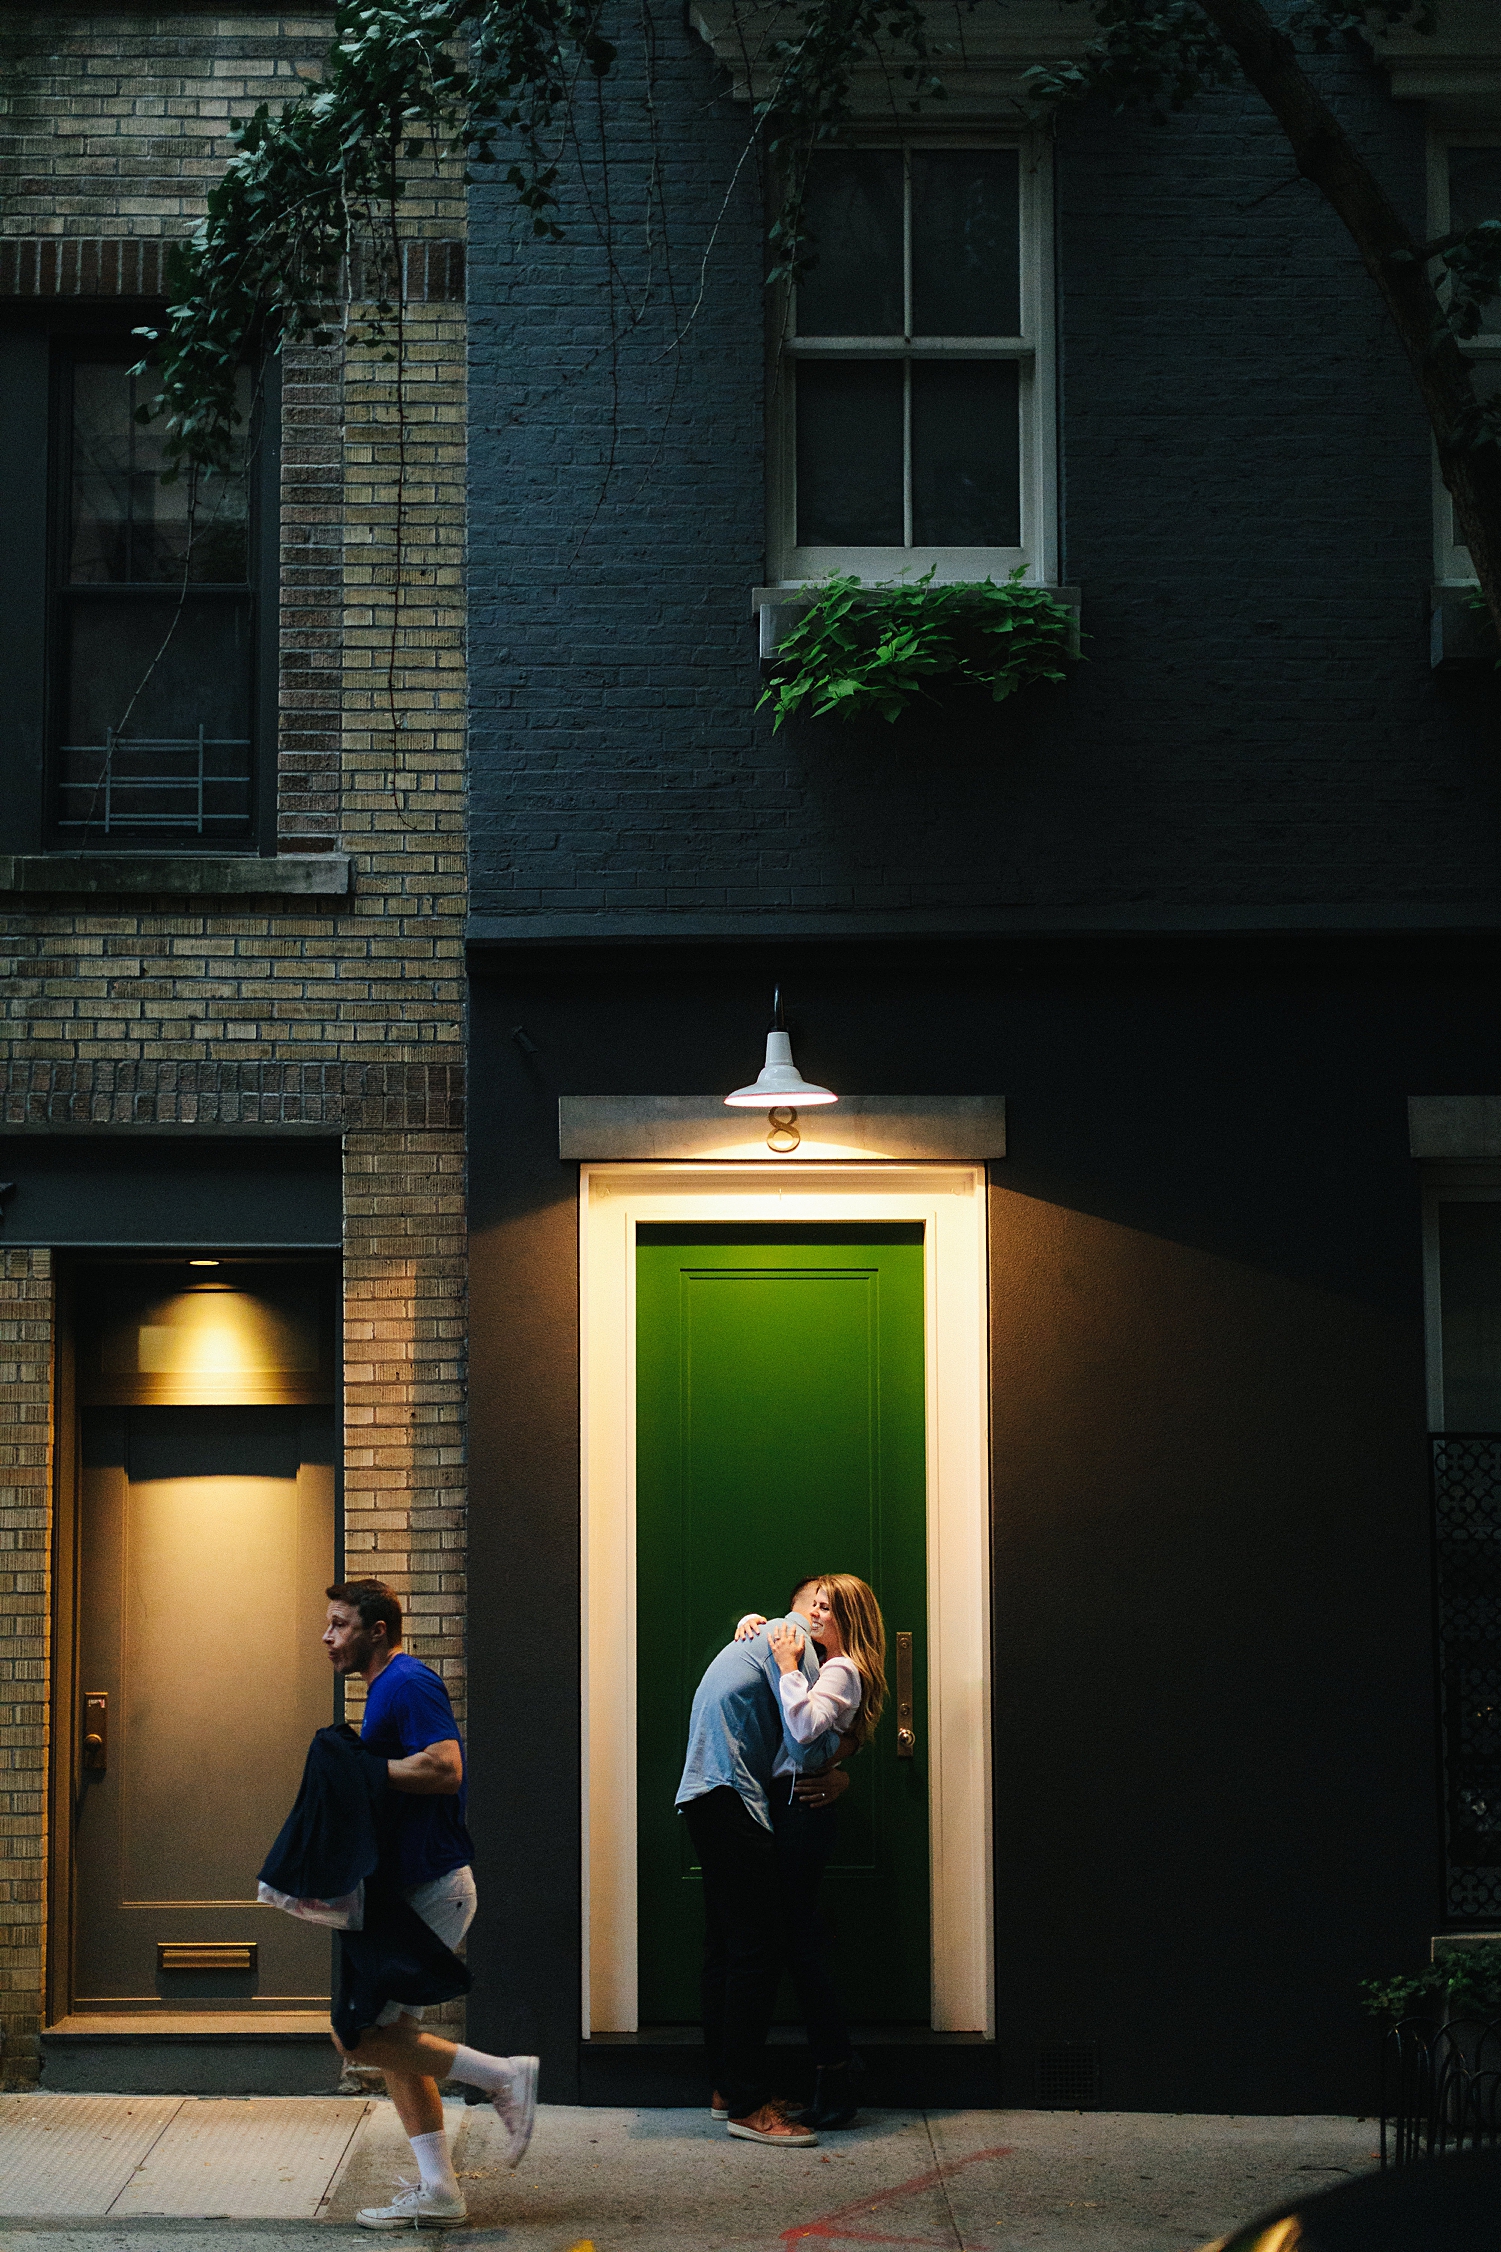 Man and woman embracing in front of green door sidewalk in greenwich city as man runs by